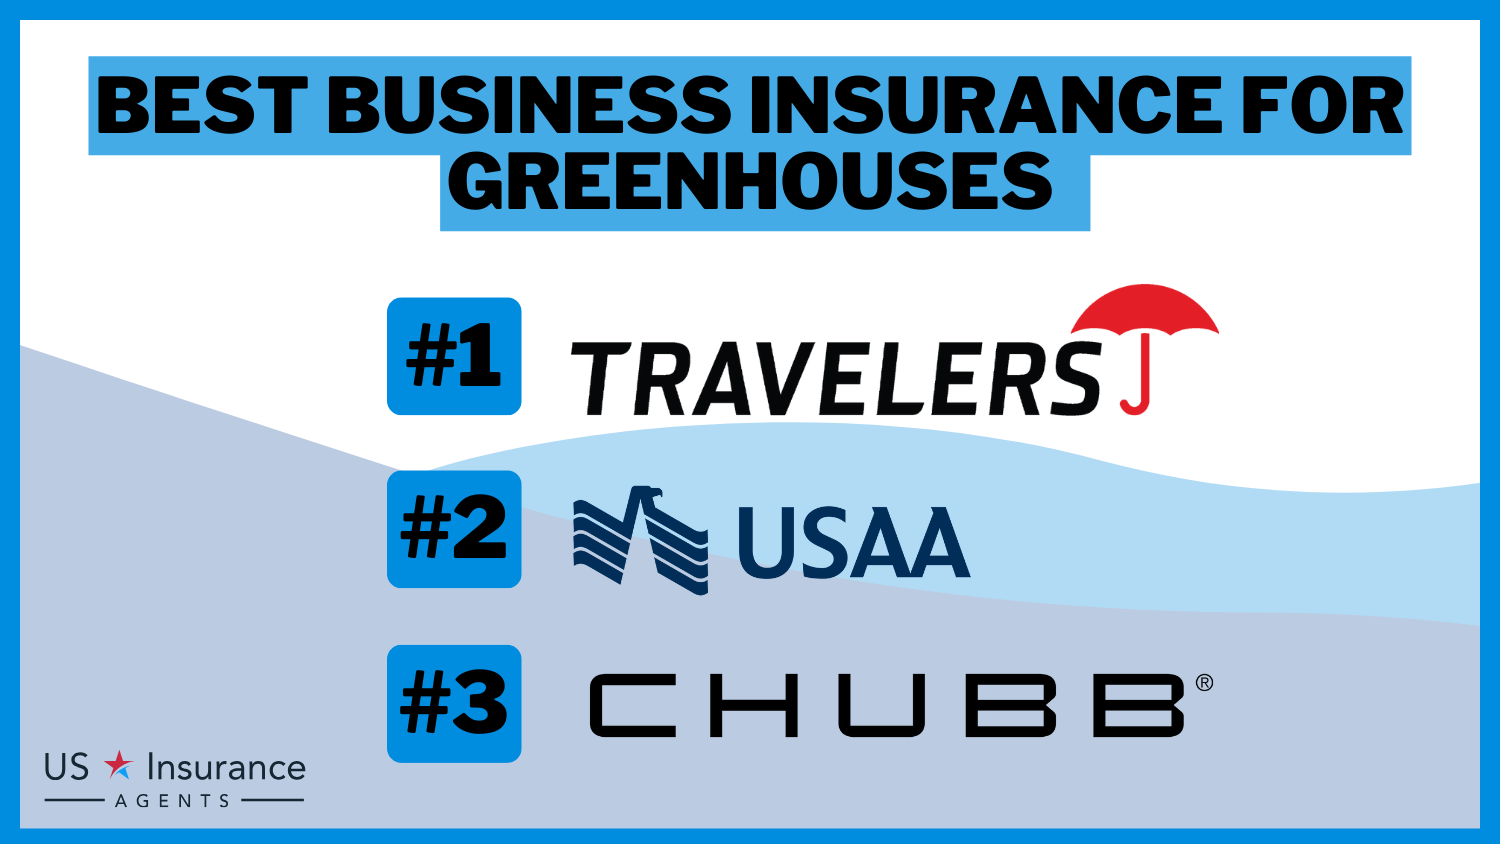 Best Business Insurance for Greenhouses: Travelers, USAA and CHUBB